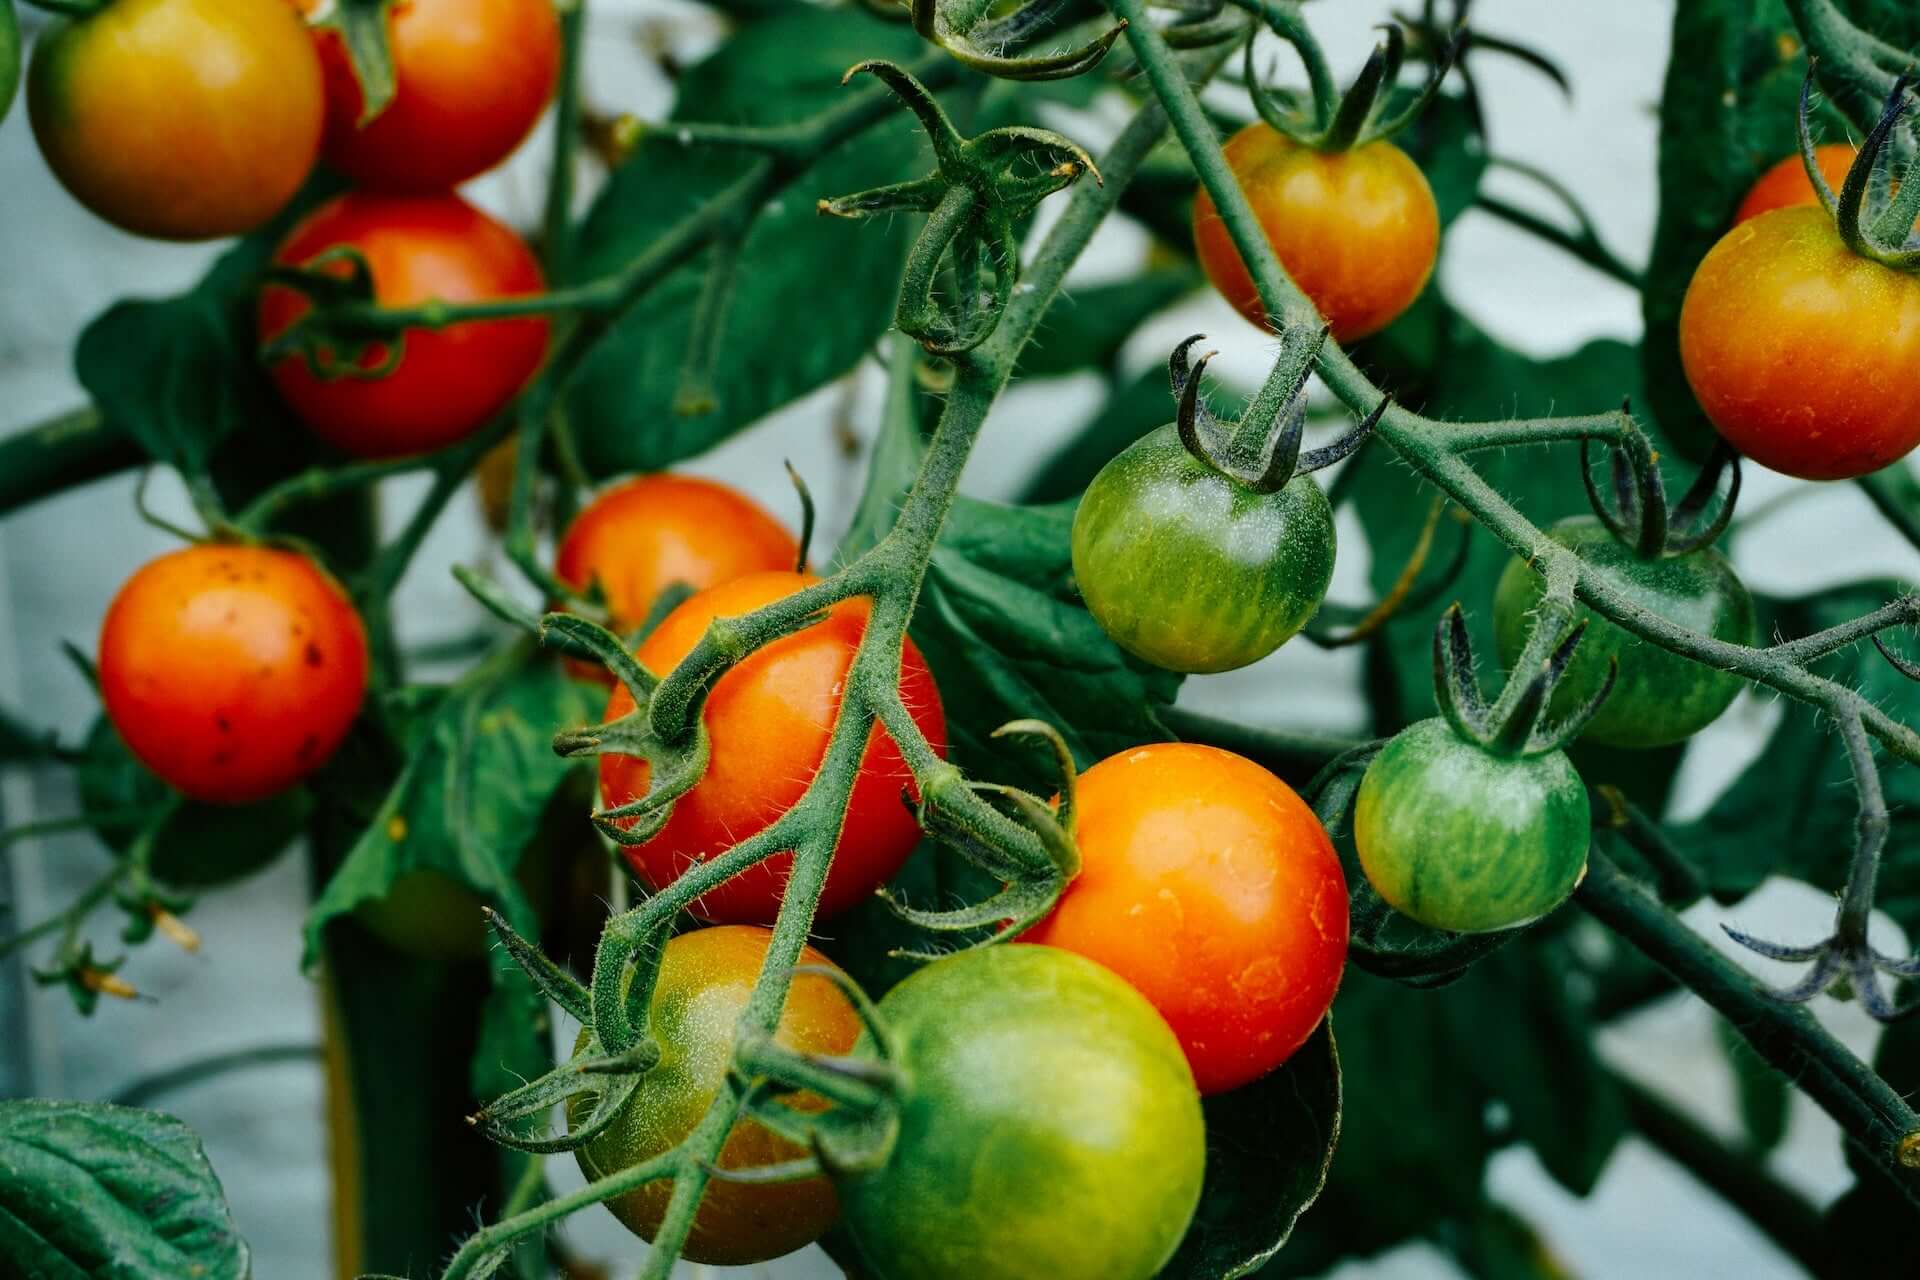 How to Grow Heirloom Tomatoes | Why Heirloom Tomatoes Are Better